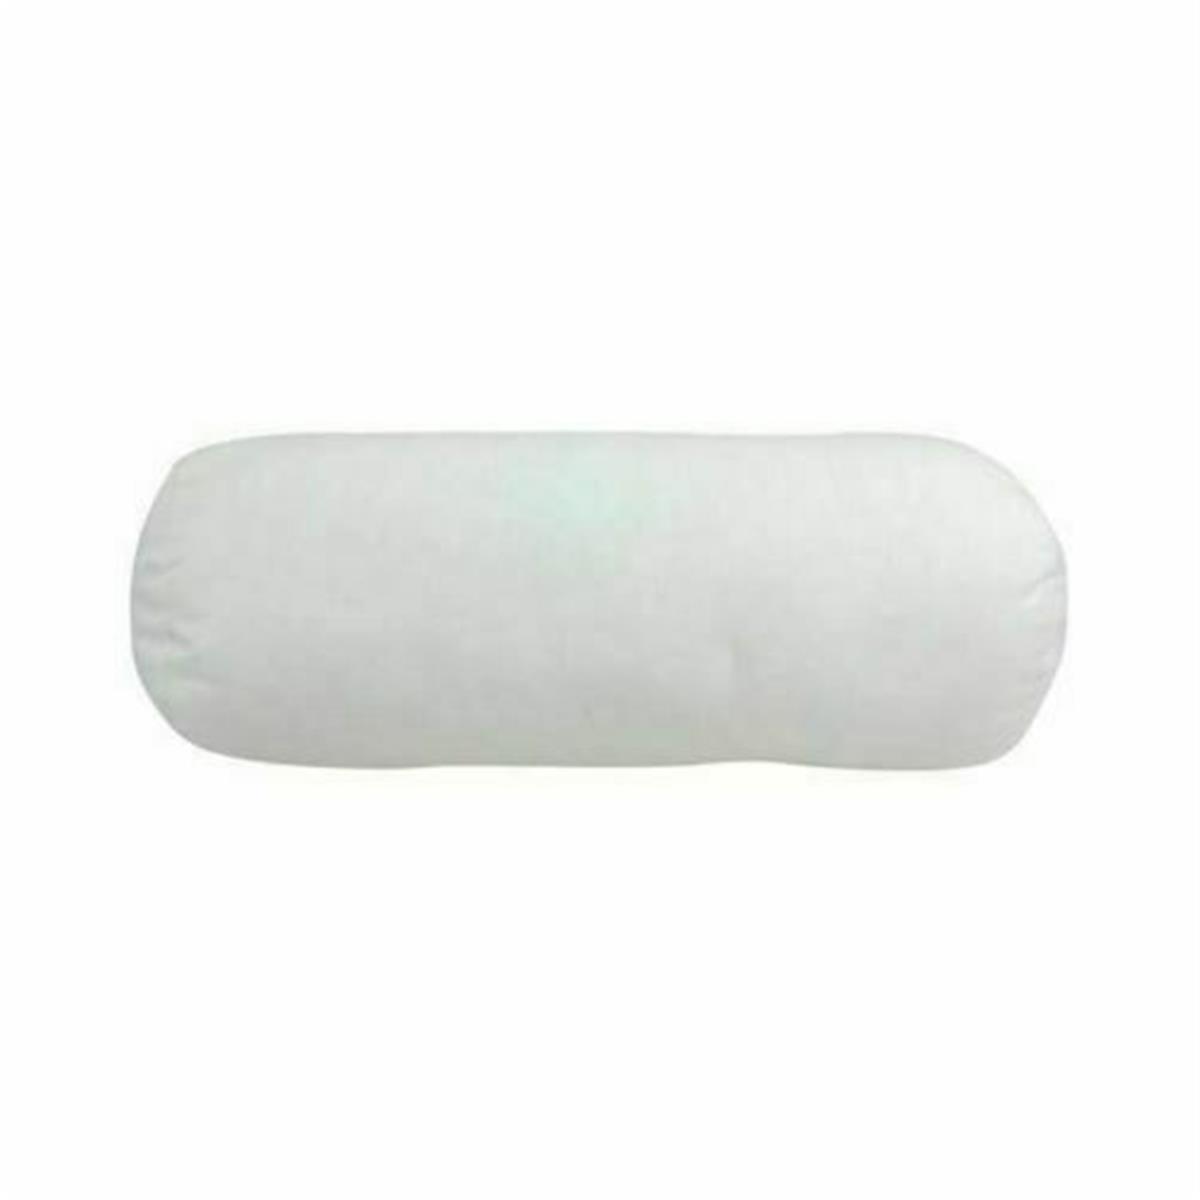 Picture of ALEX 10012 Cervical Pillow - 7 x 17 in.